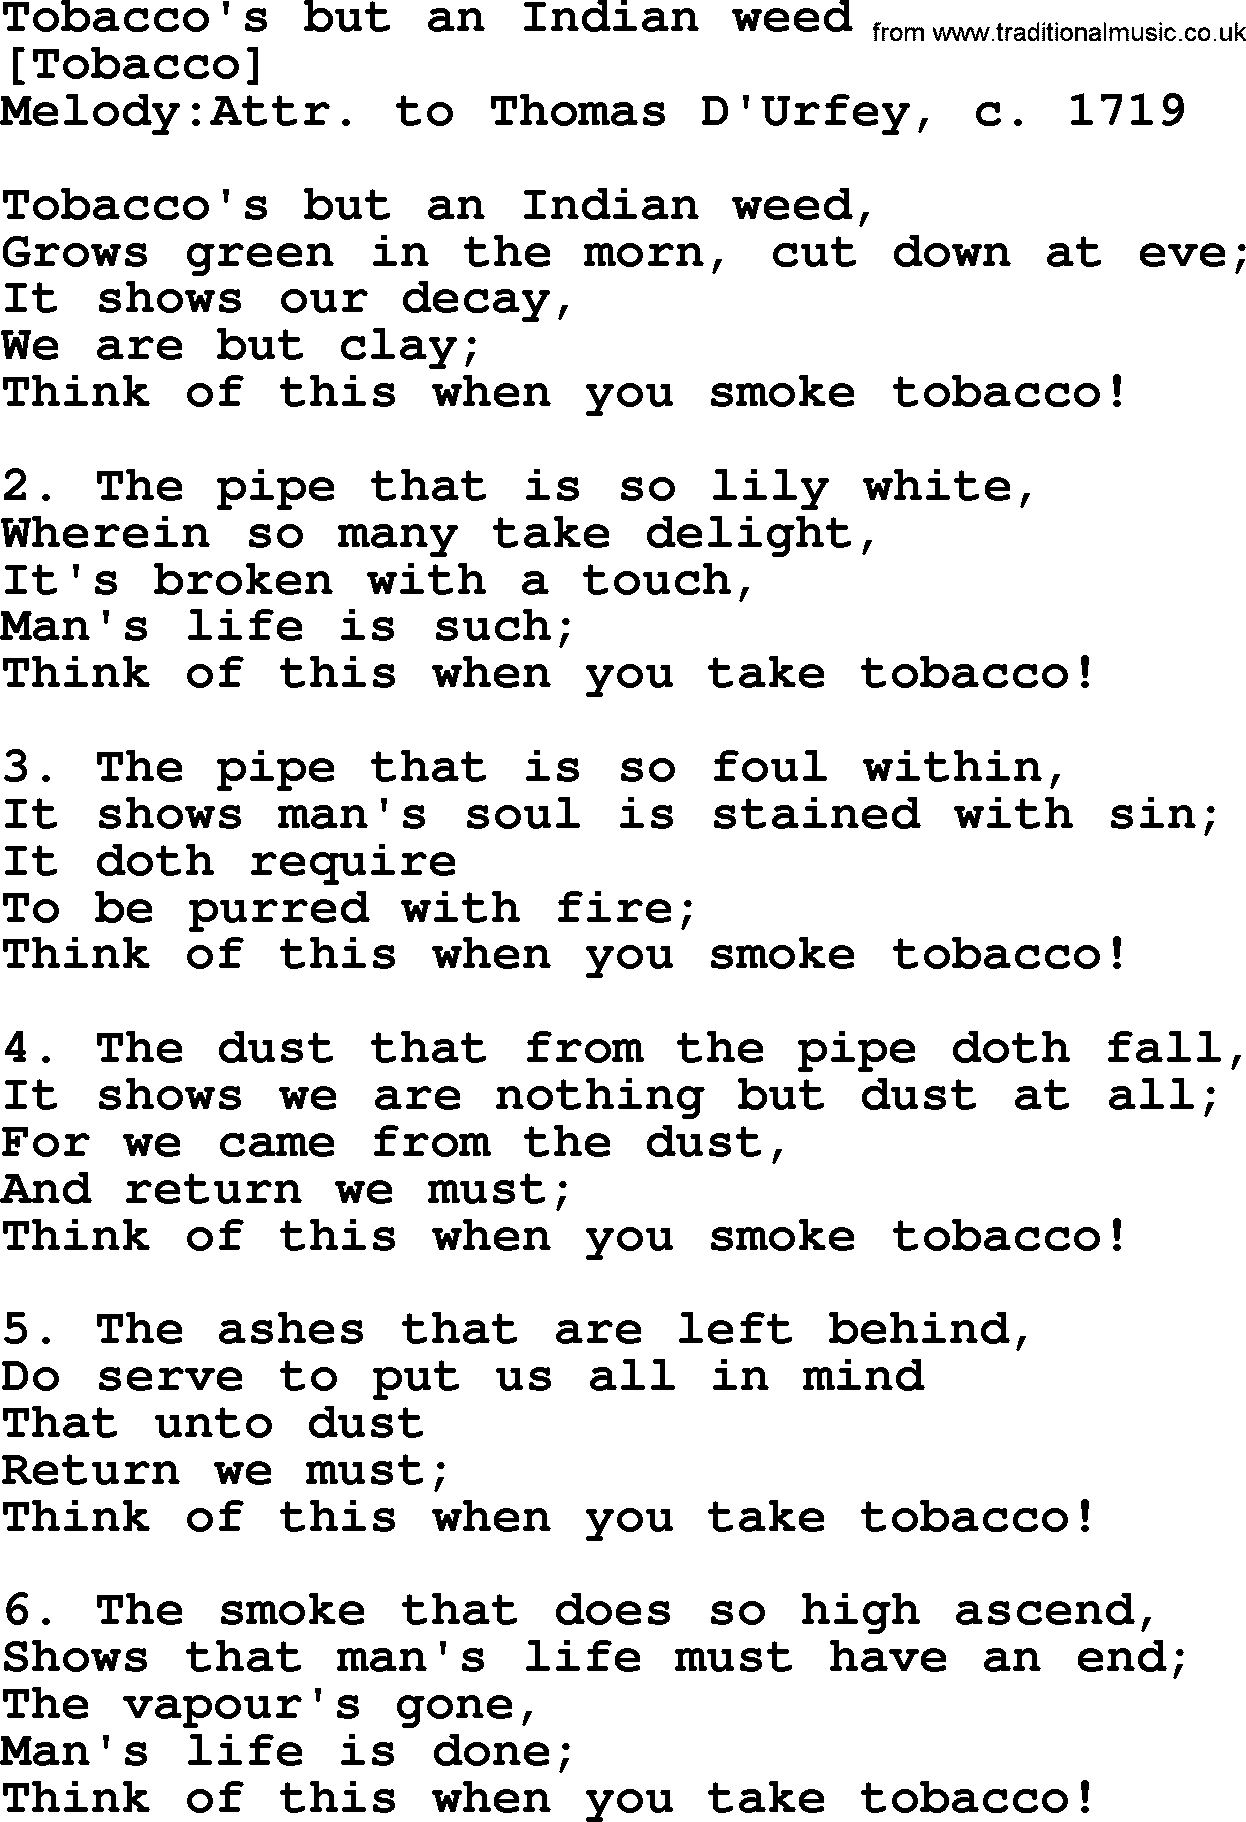 Old English Song: Tobacco's But An Indian Weed lyrics